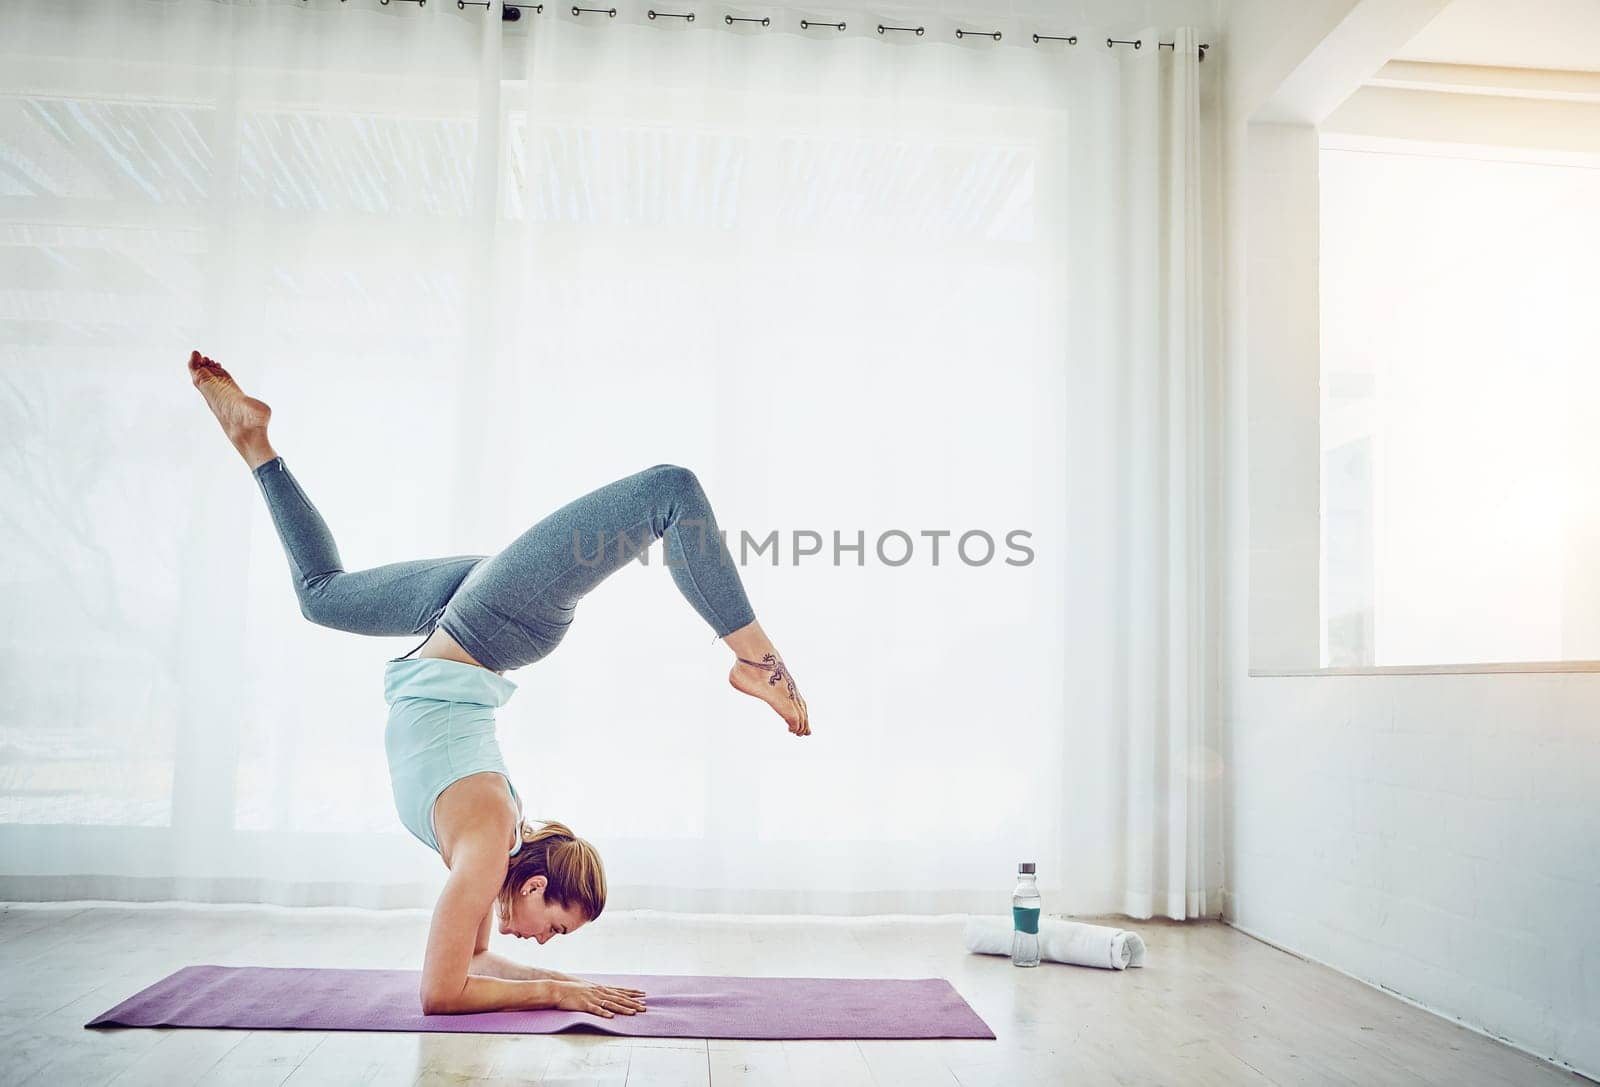 Yoga was made for me. an attractive woman practising her yoga routine at home. by YuriArcurs